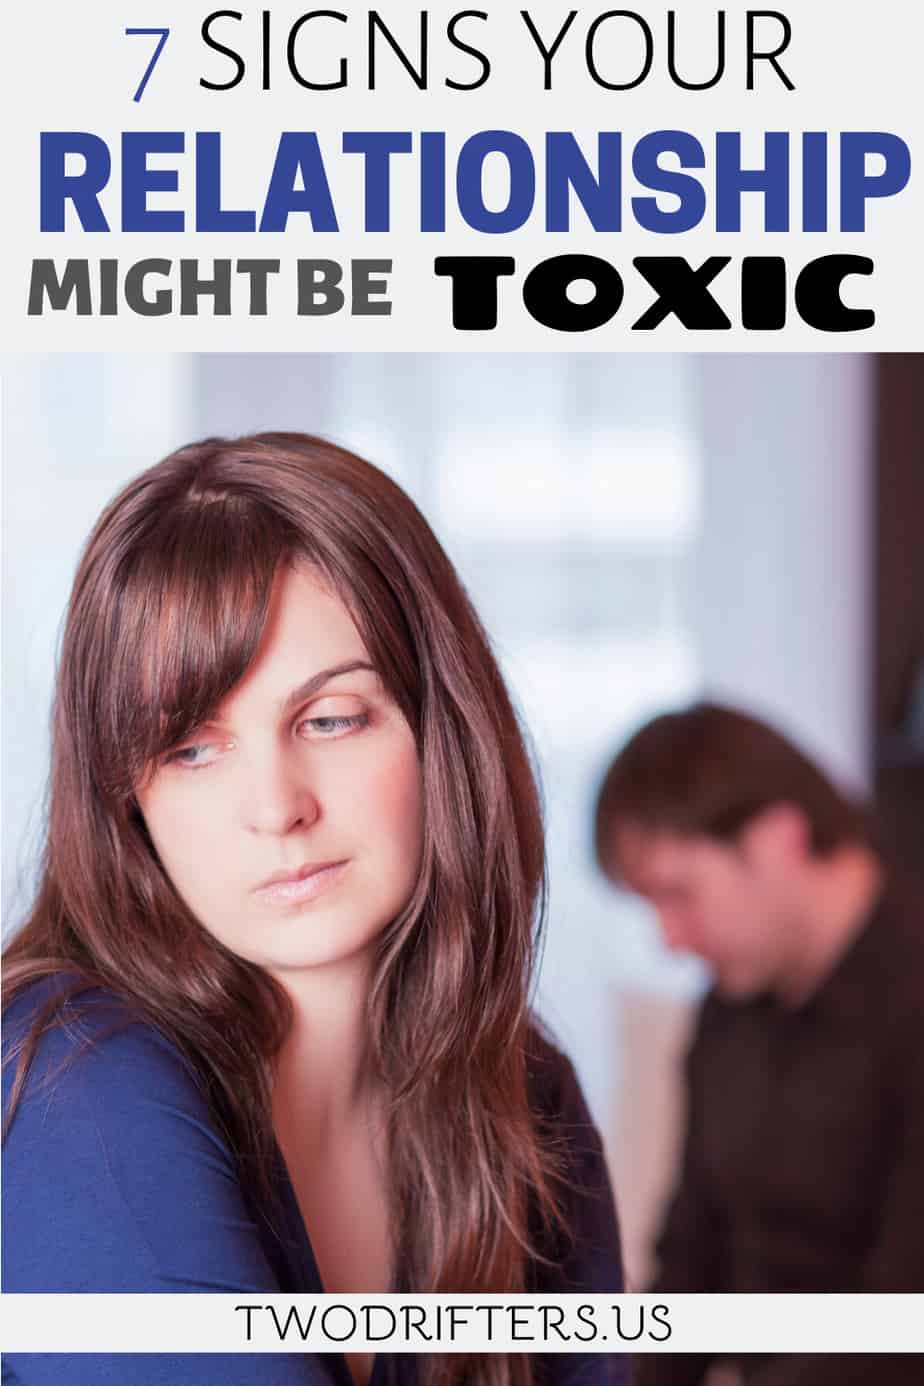 Pinterest social image that says "7 Signs Your Relationship Might Be Toxic."